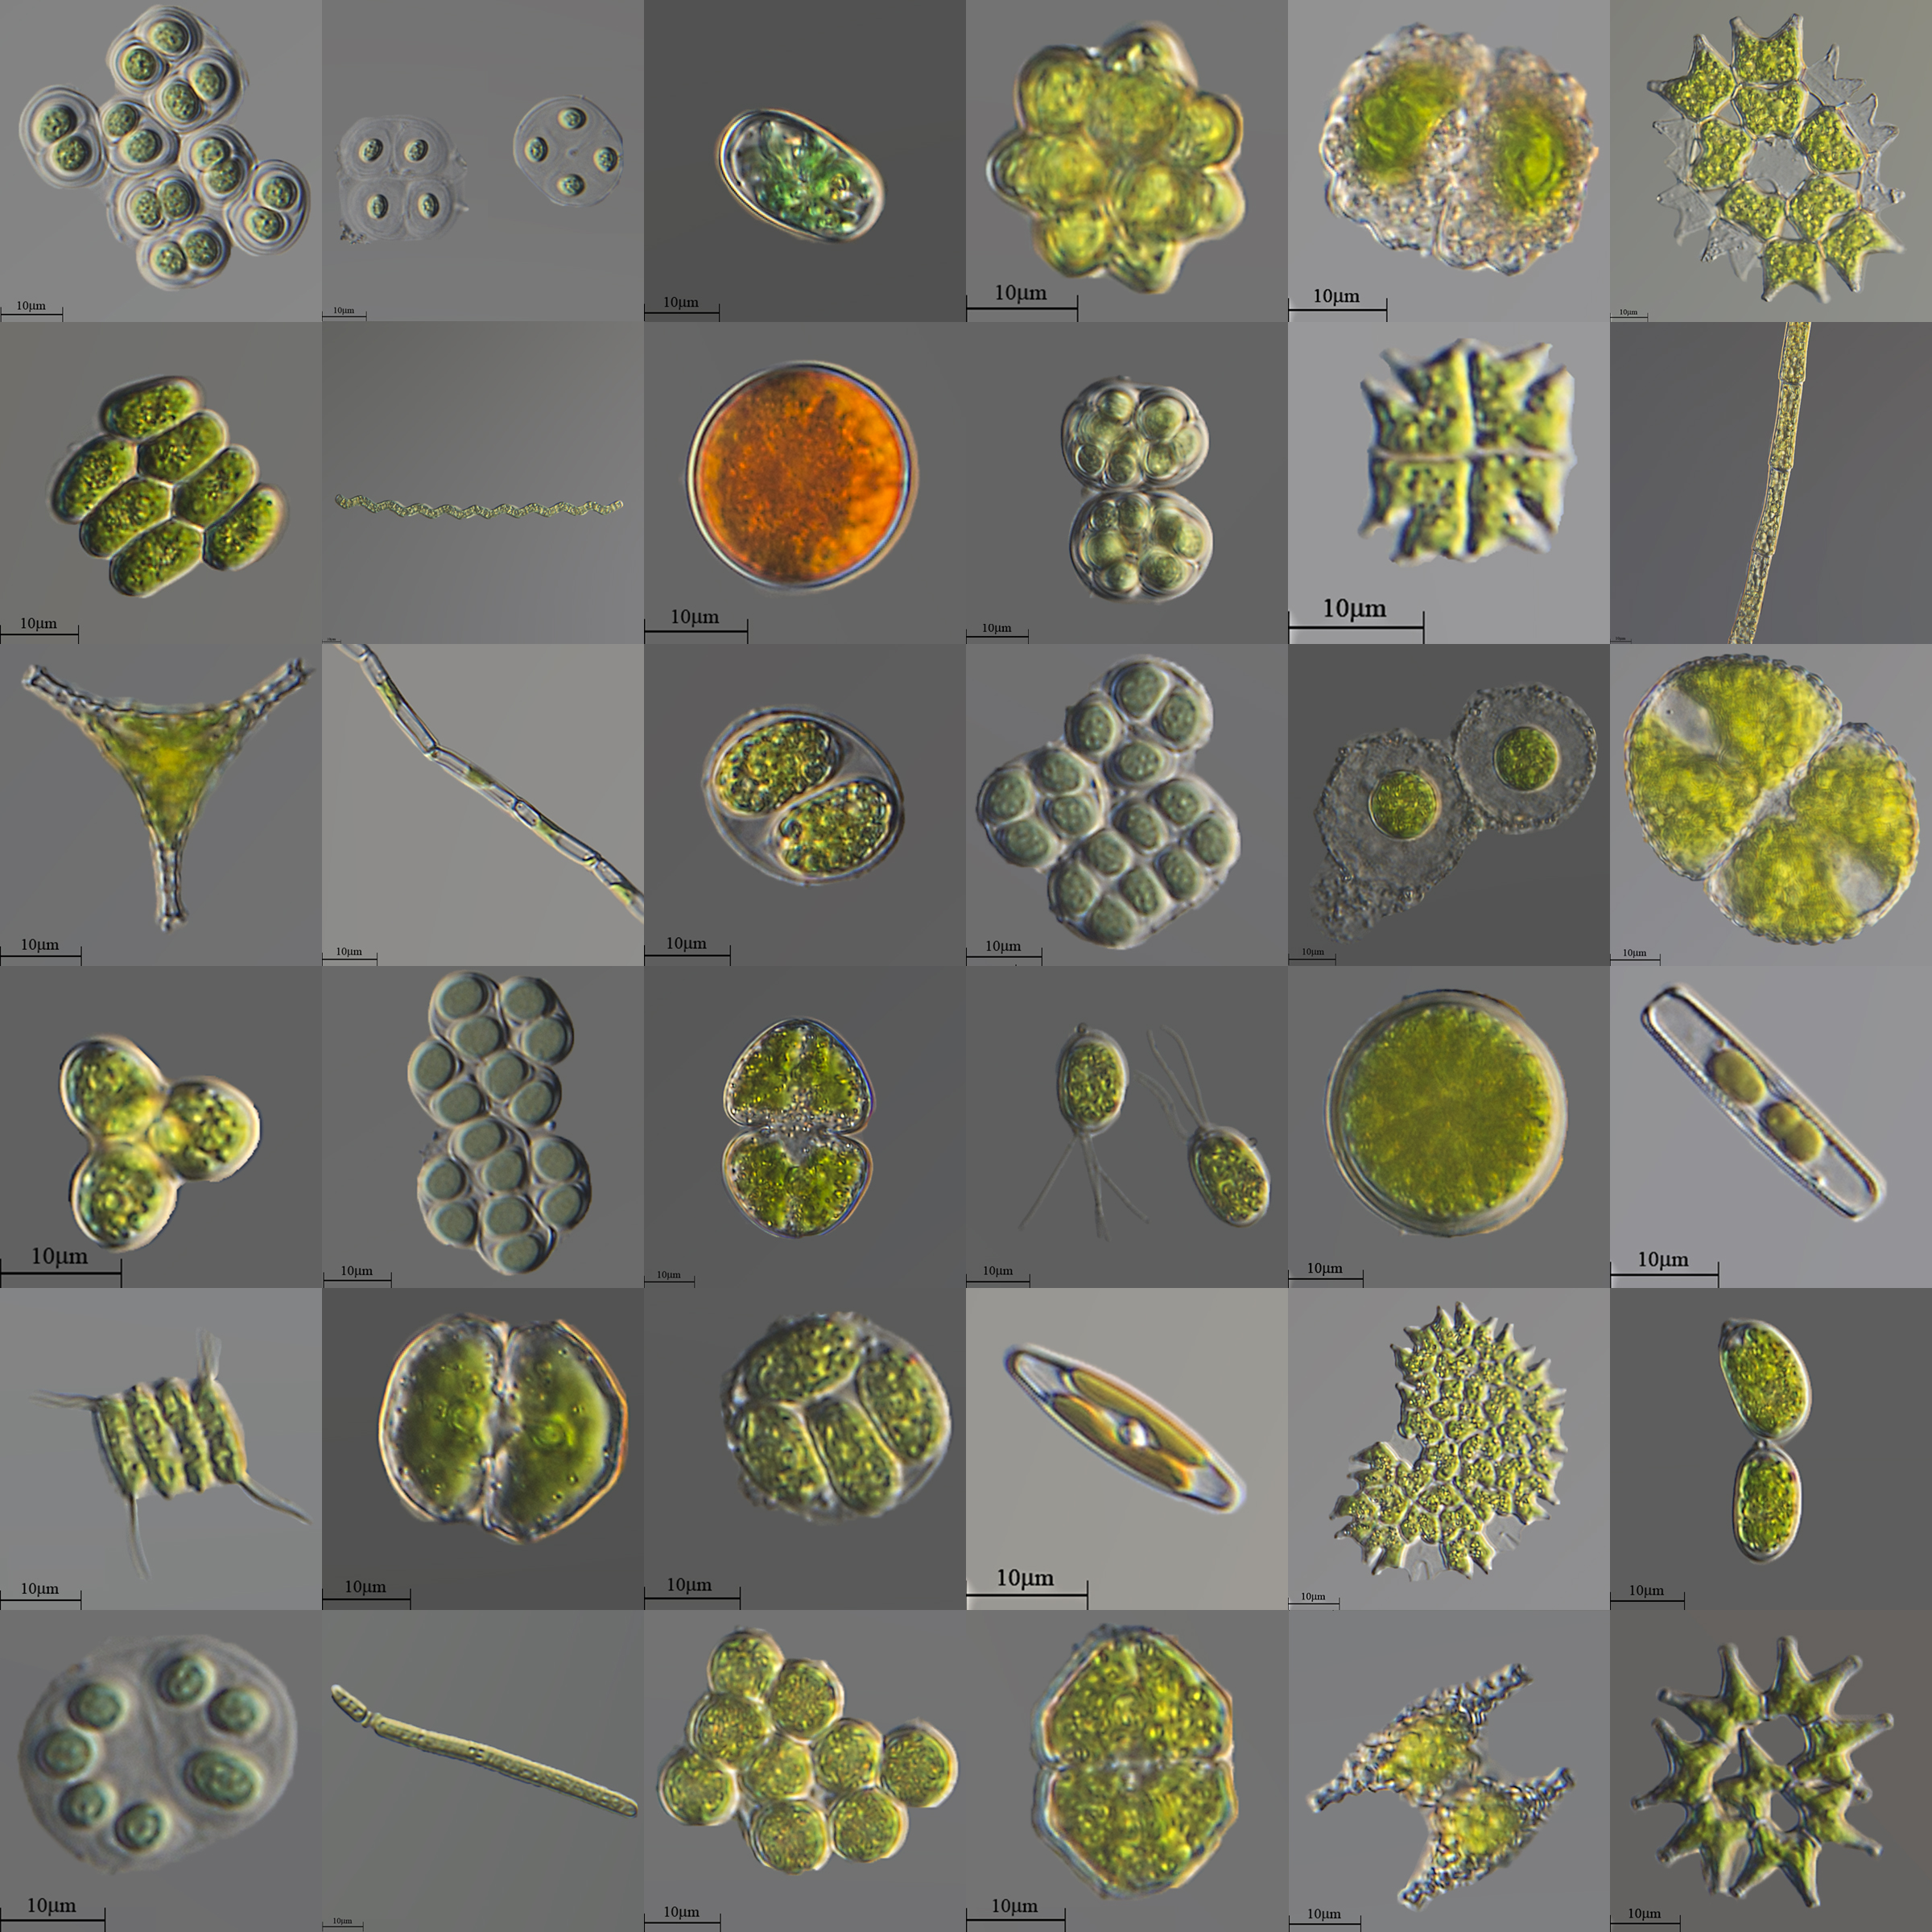 A variety of microscopic unicellular and colonial freshwater algae